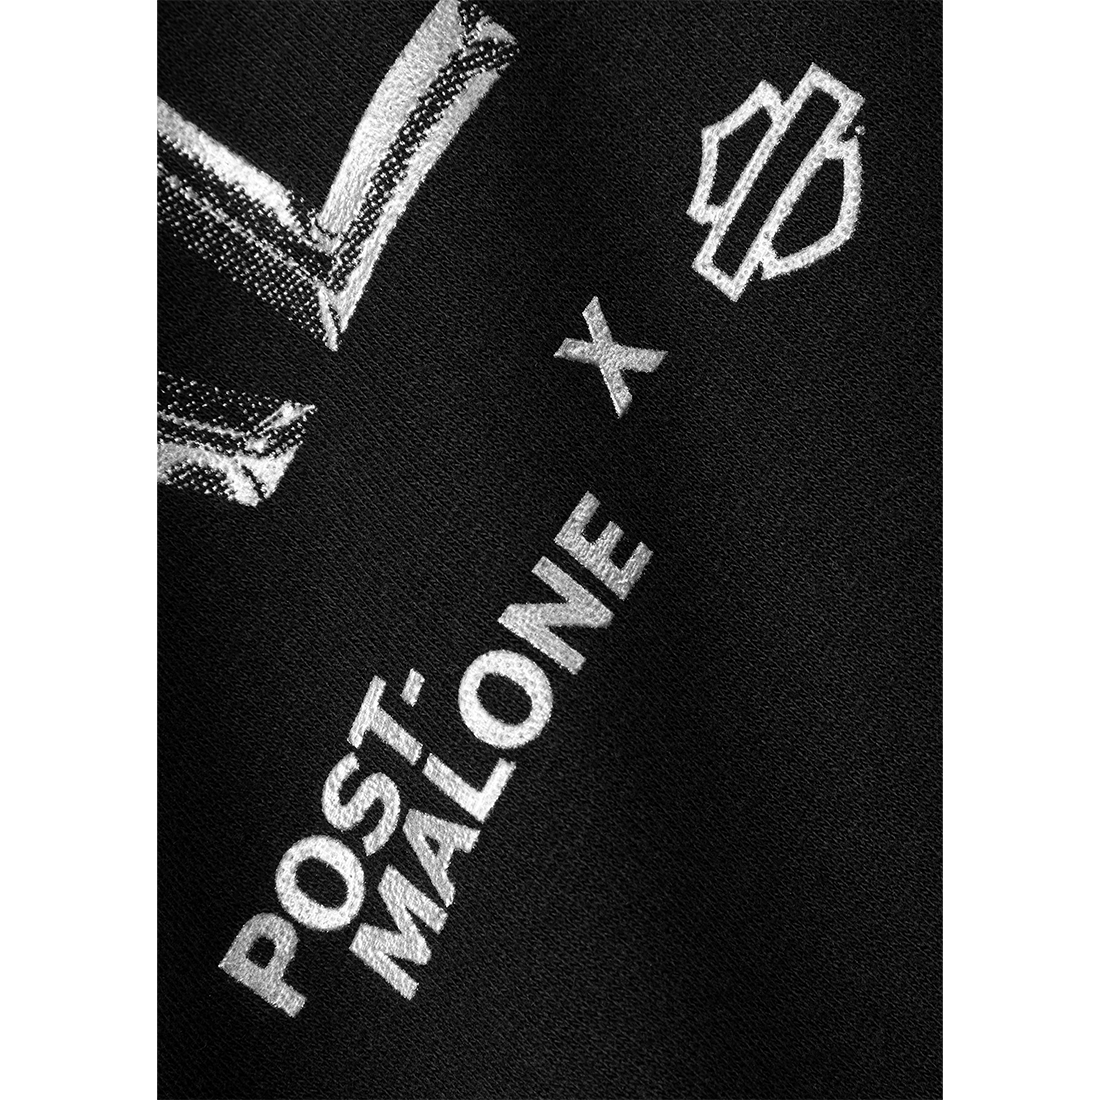 POST MALONE x H-D CHROME MALONE PULLOVER HOODIE DETAIL 1